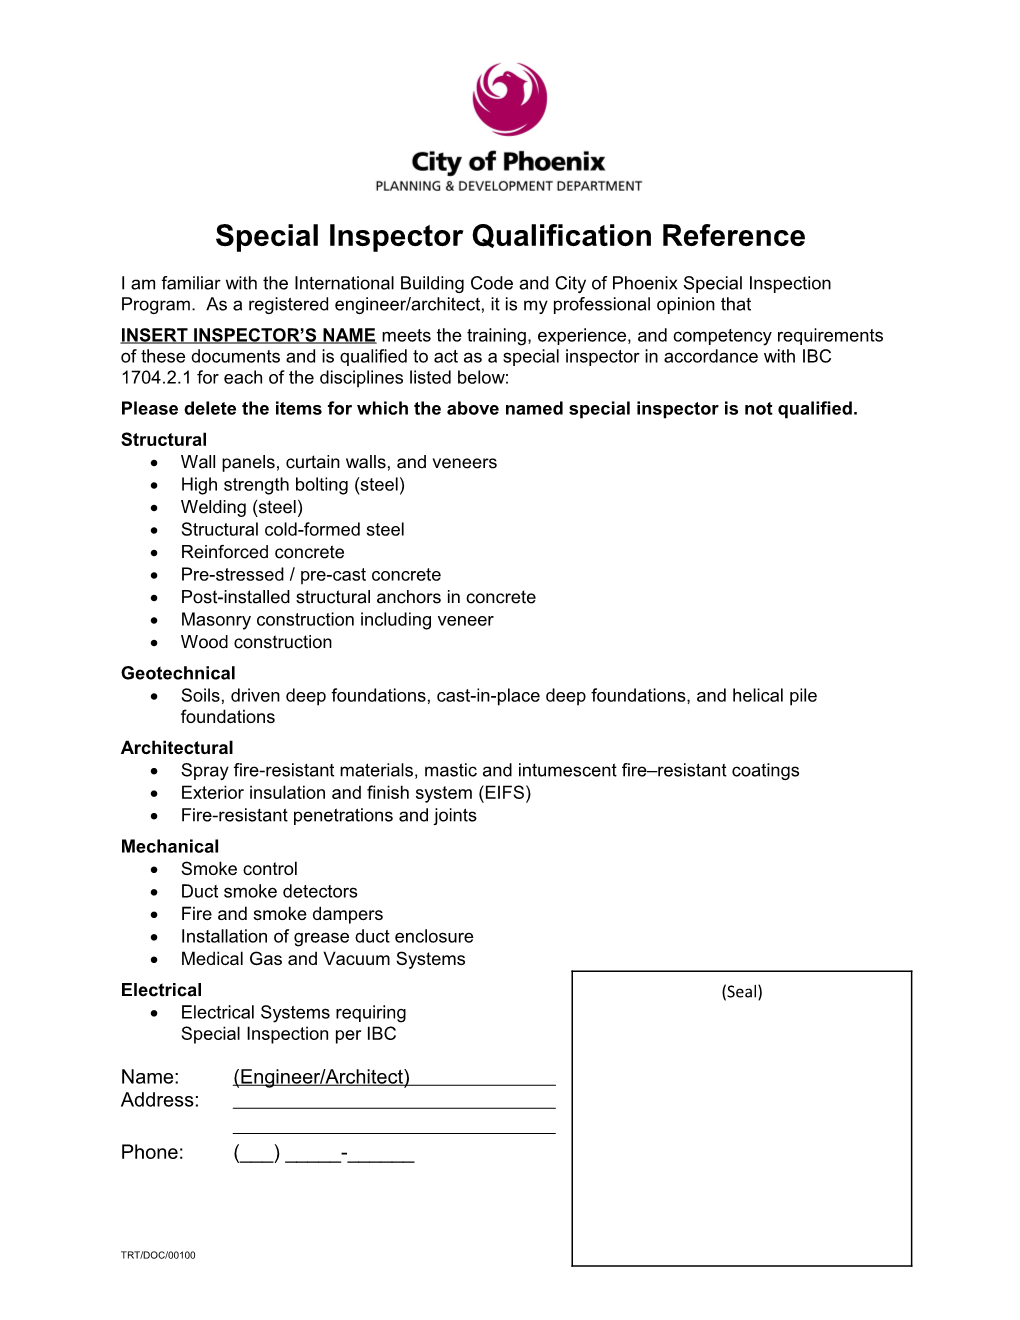 Special Inspector Qualification Reference